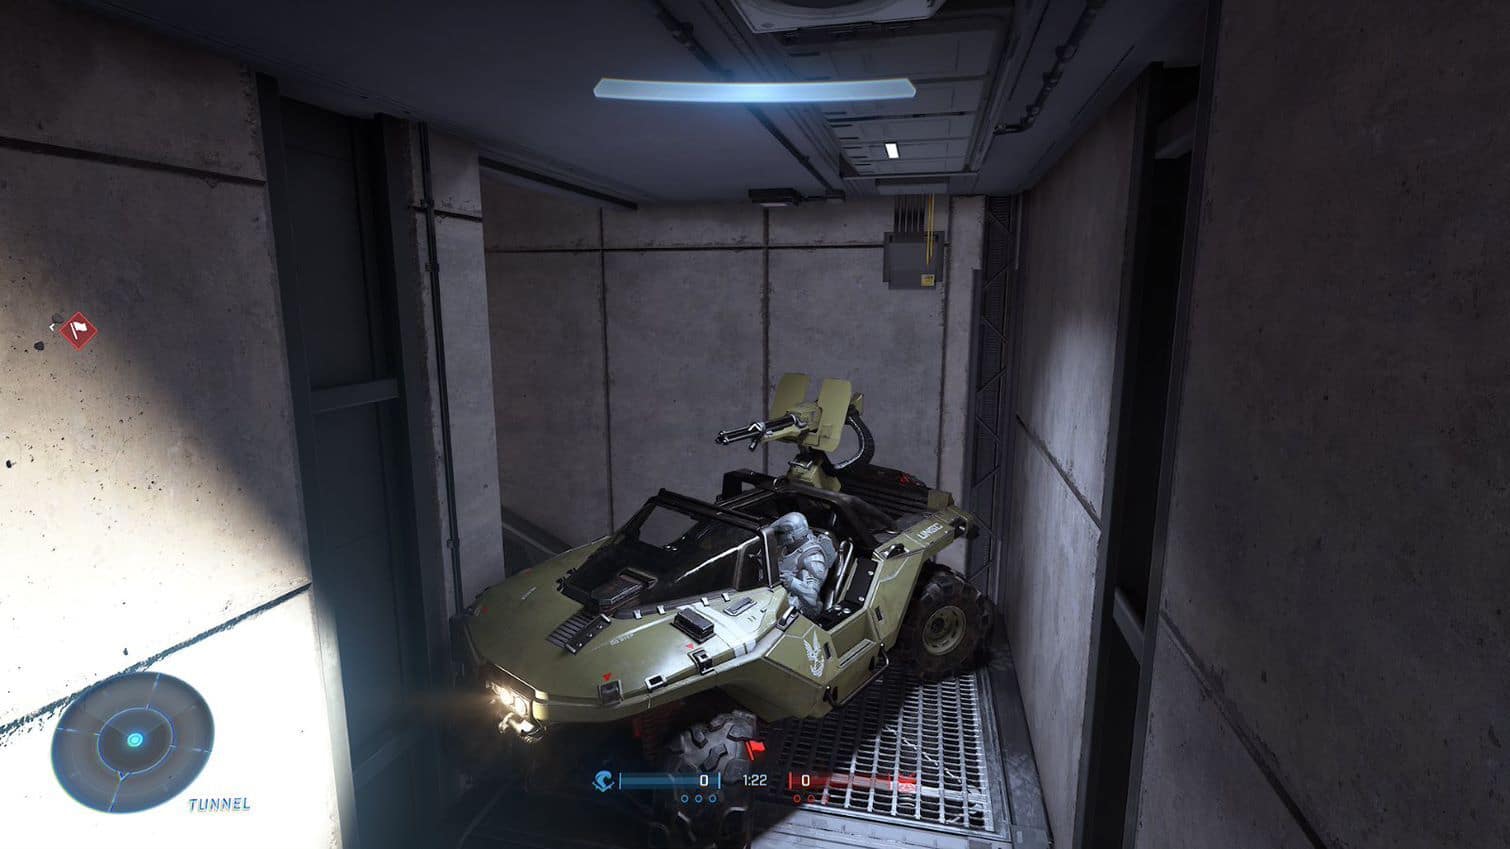 Halo Infinite Launch Site multiplayer beta troll trolling vehicles vehicle Warthog does not fit anywhere and is useless, thanks 343 Industries